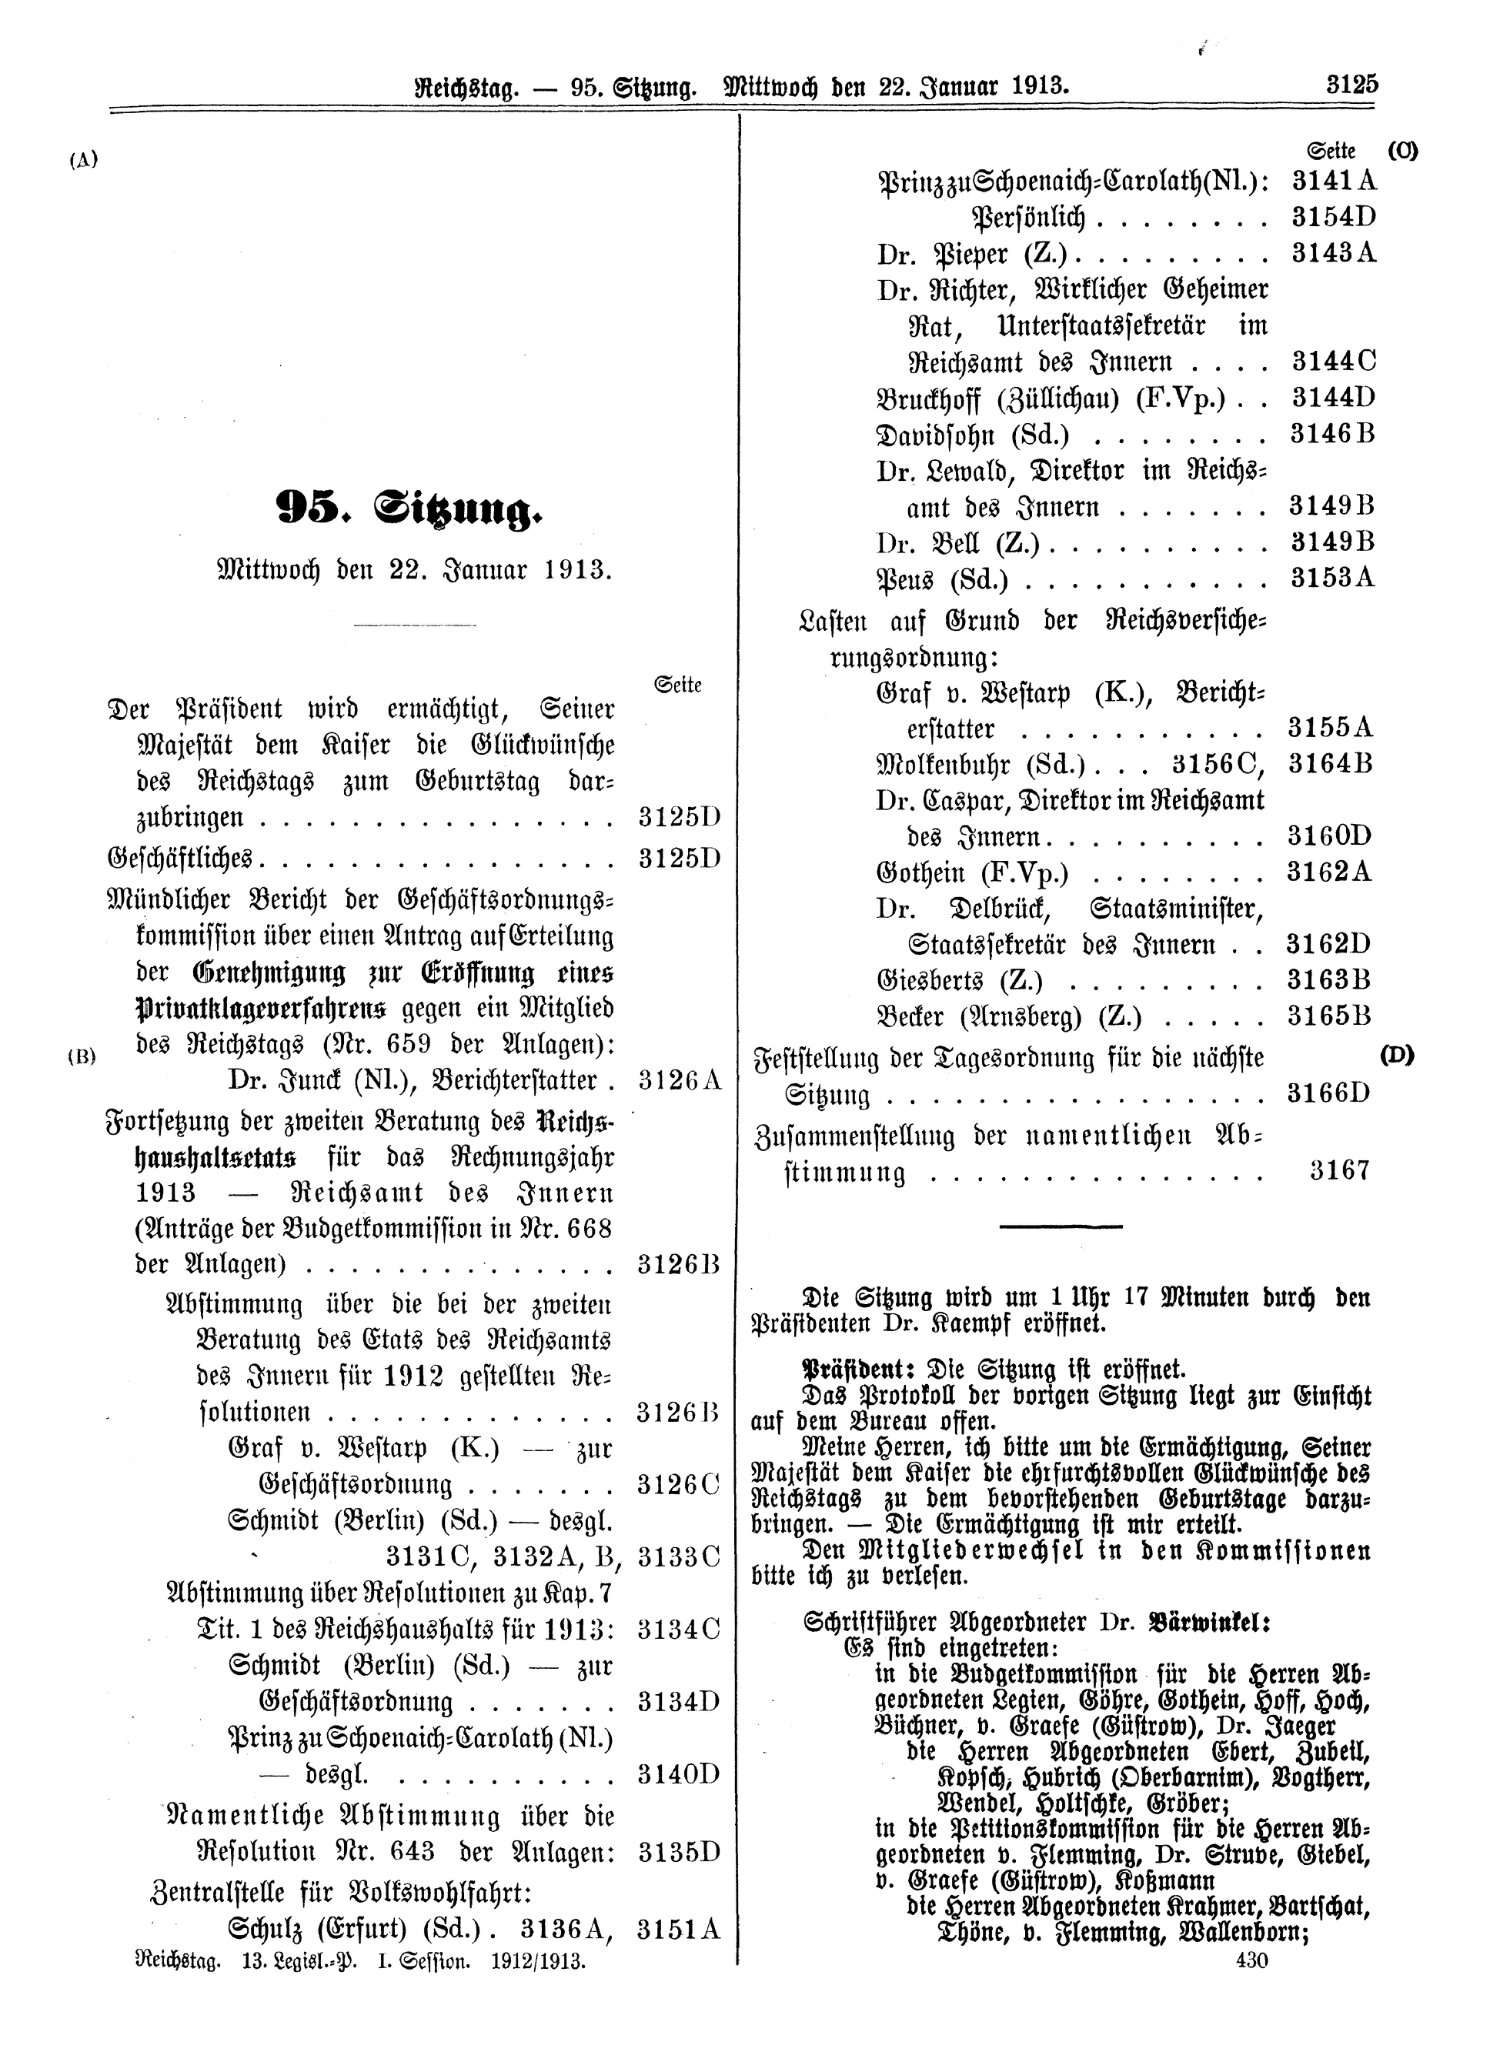 Scan of page 3125